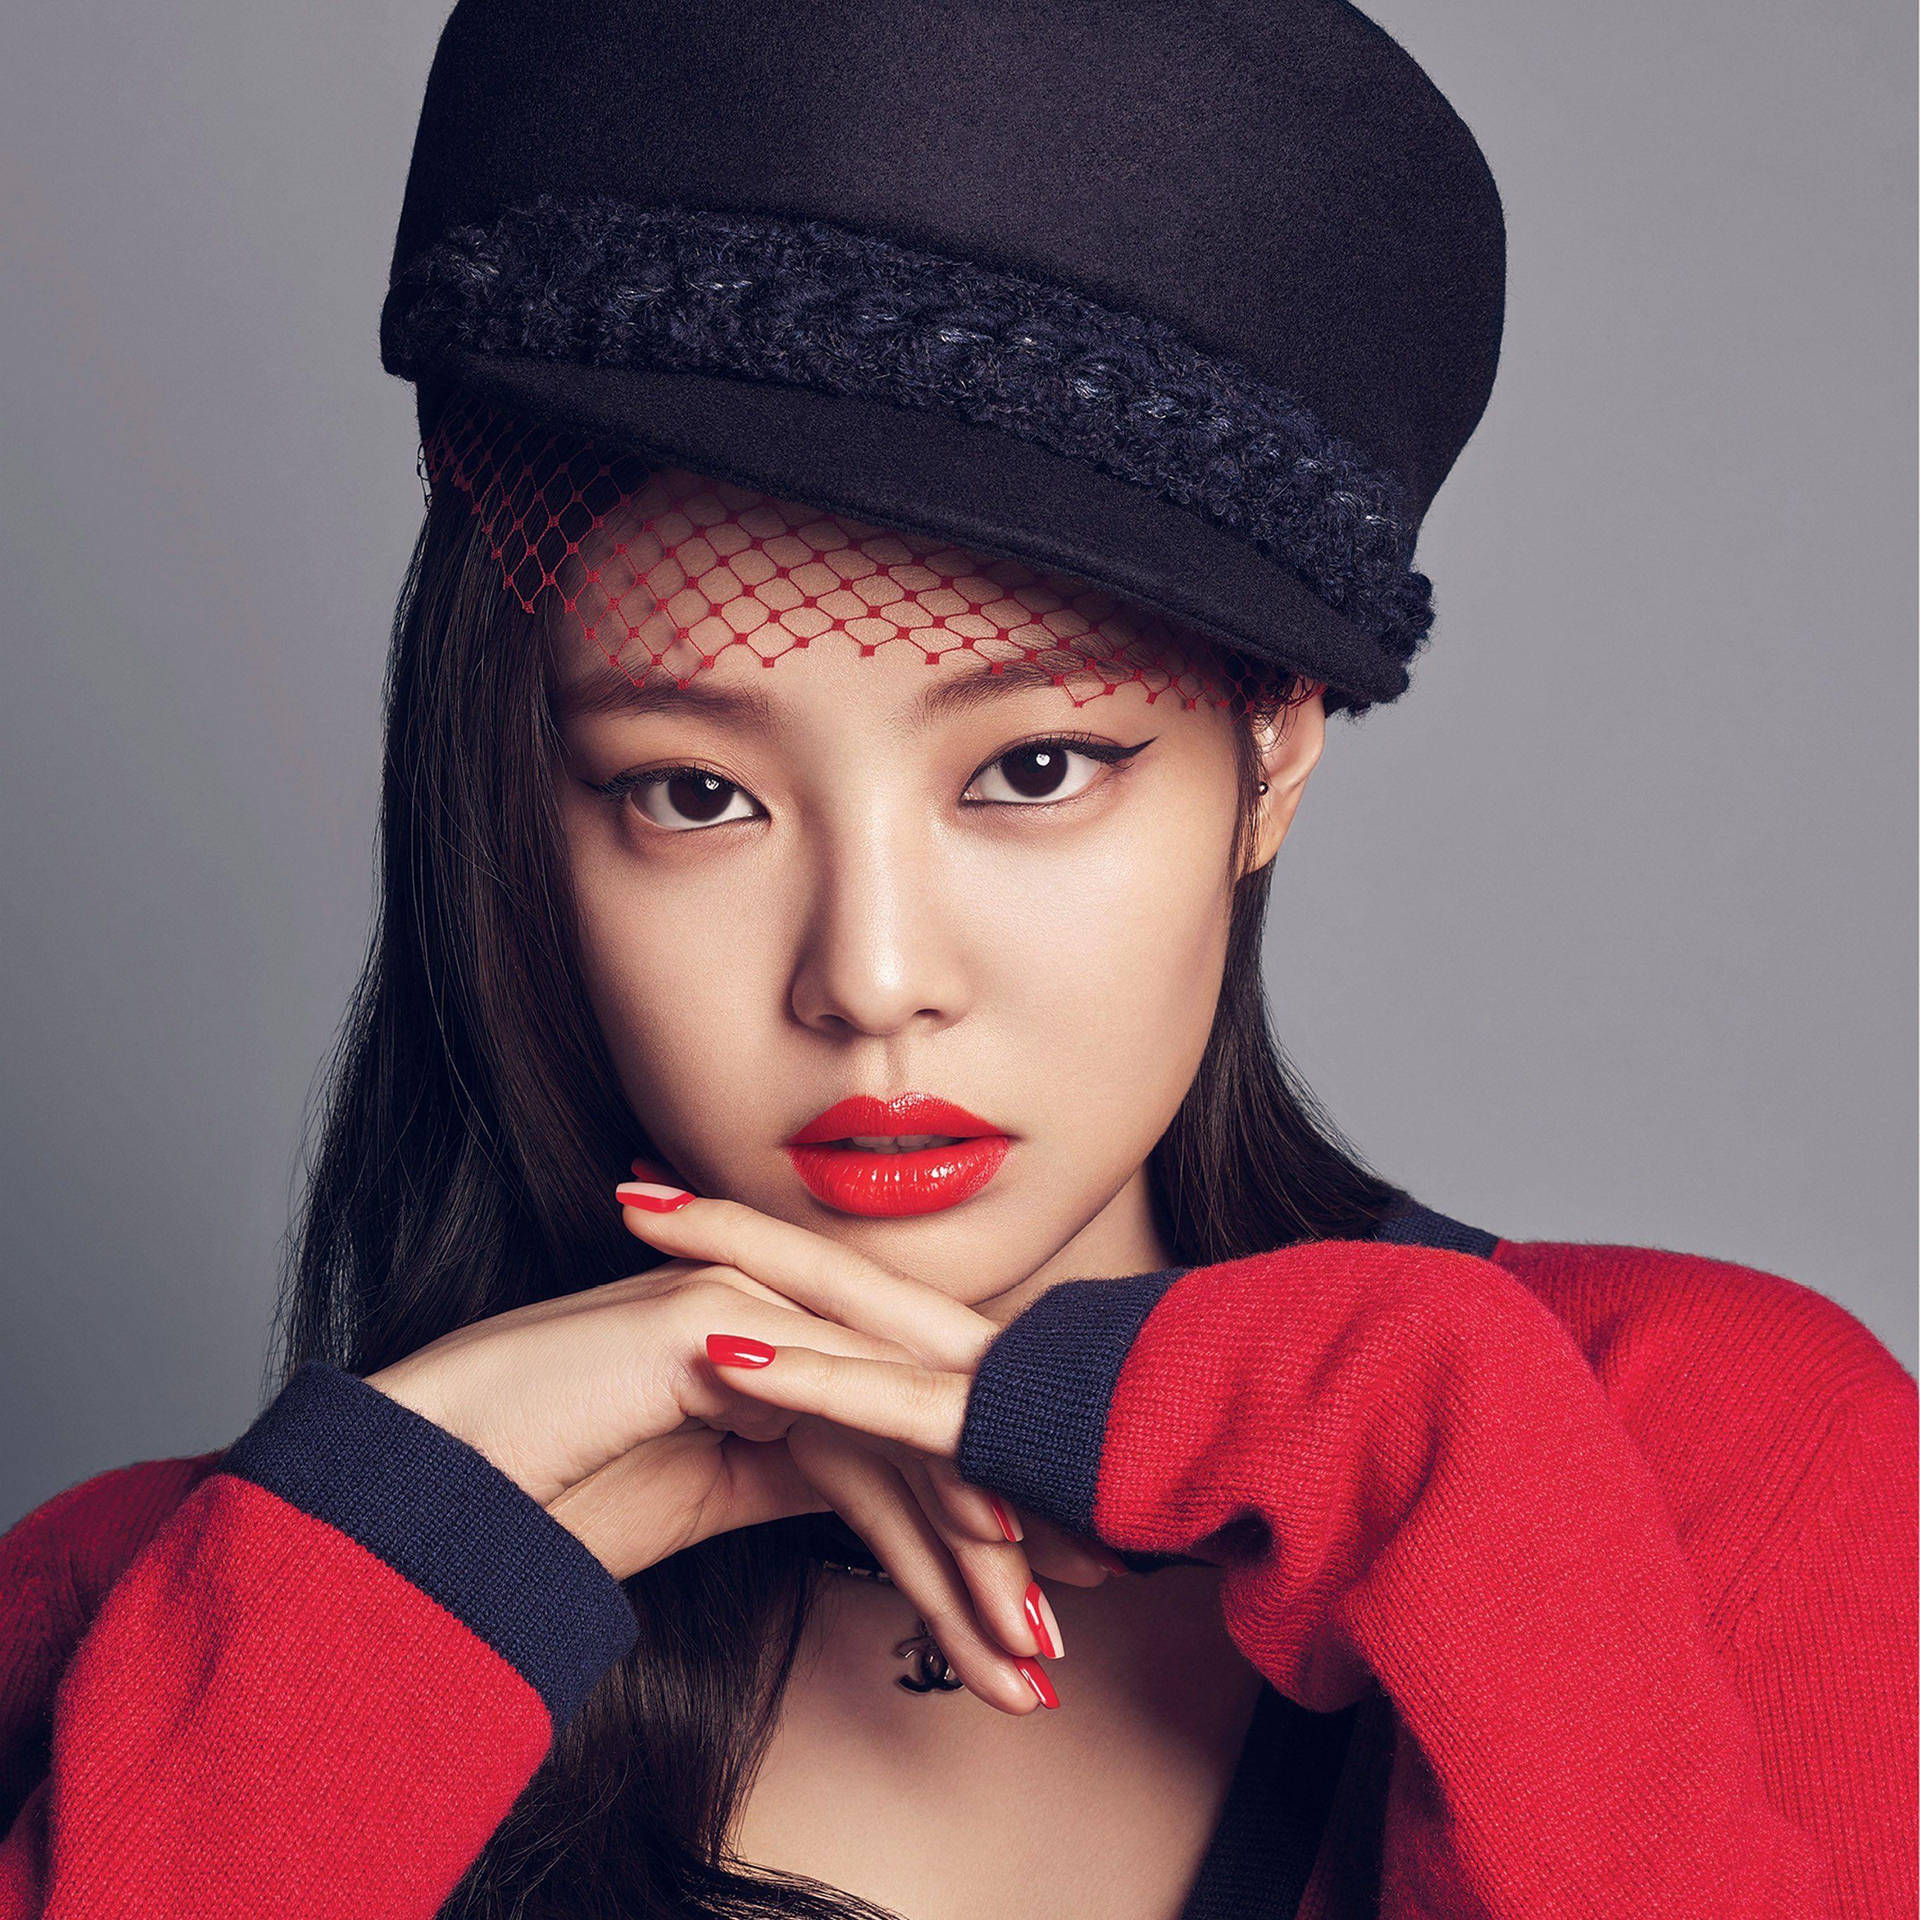 Jennie Wearing Red Coat And Hat Background